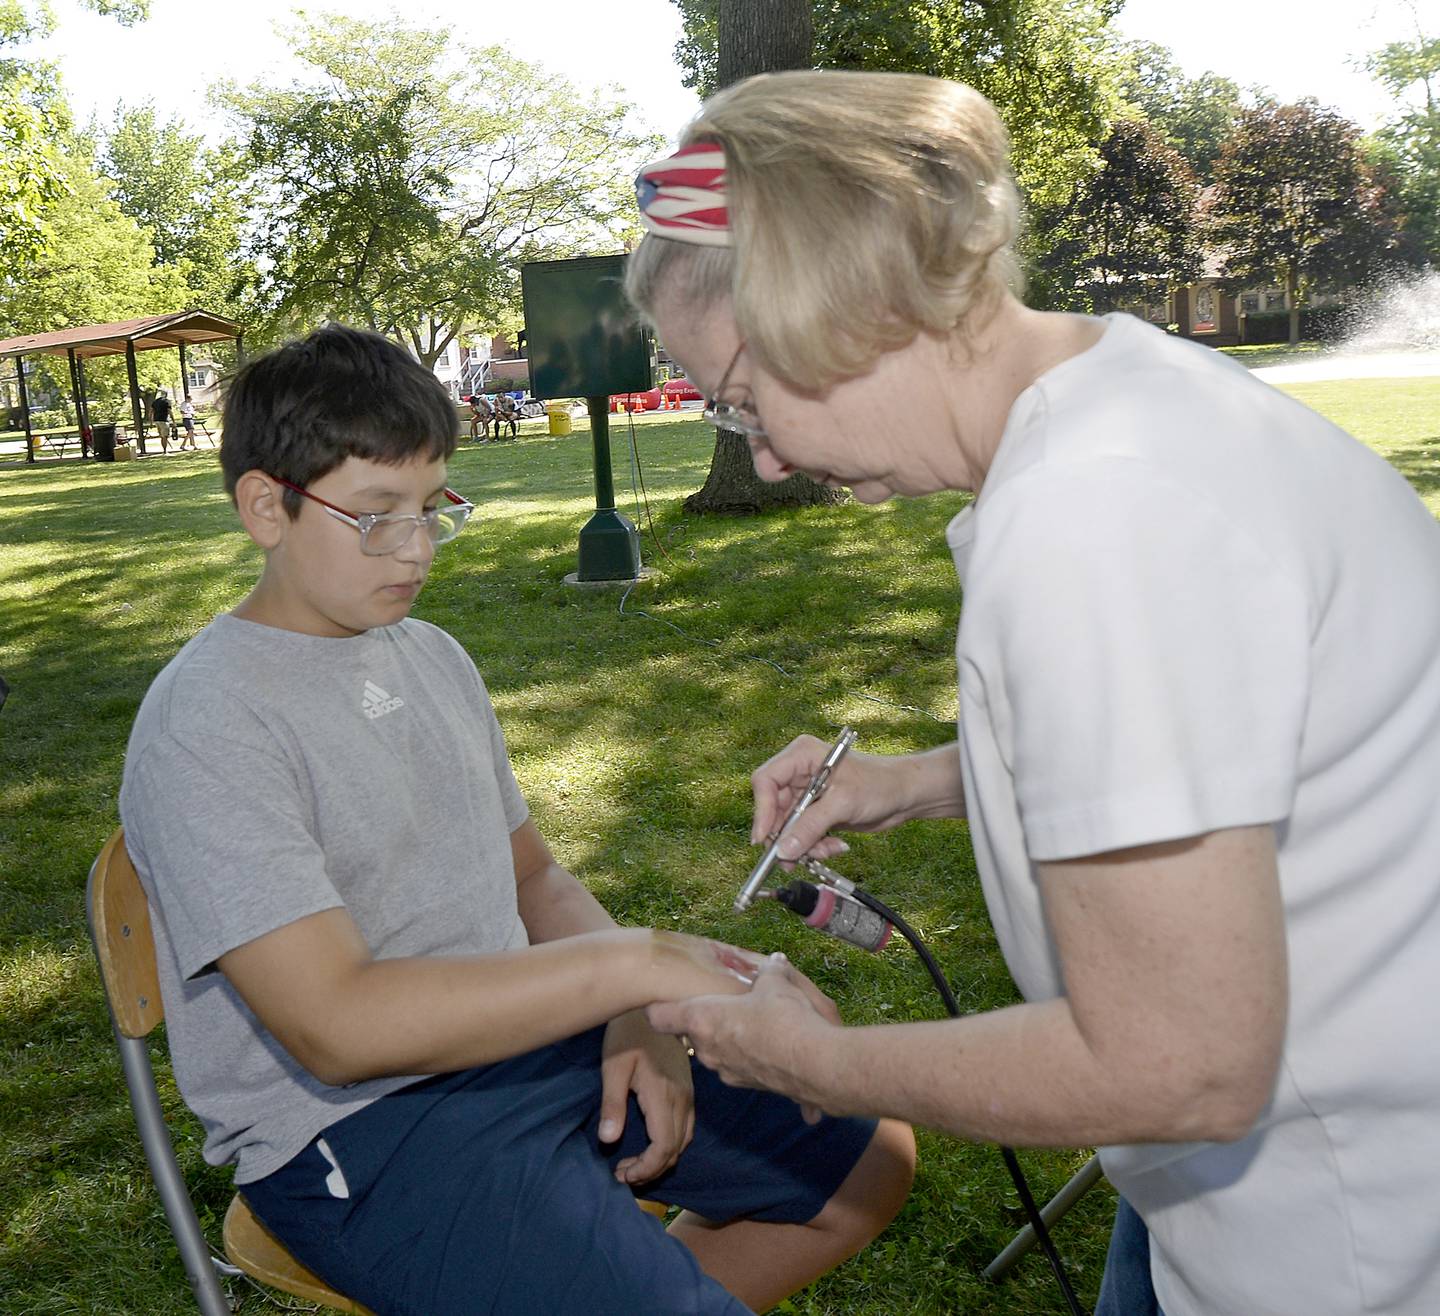 Eli Sphar has an airbrushed tattoo applied by Michelle Orban on Saturday, July 2, 2022, during the Kids Corner event at City Park in Streator.